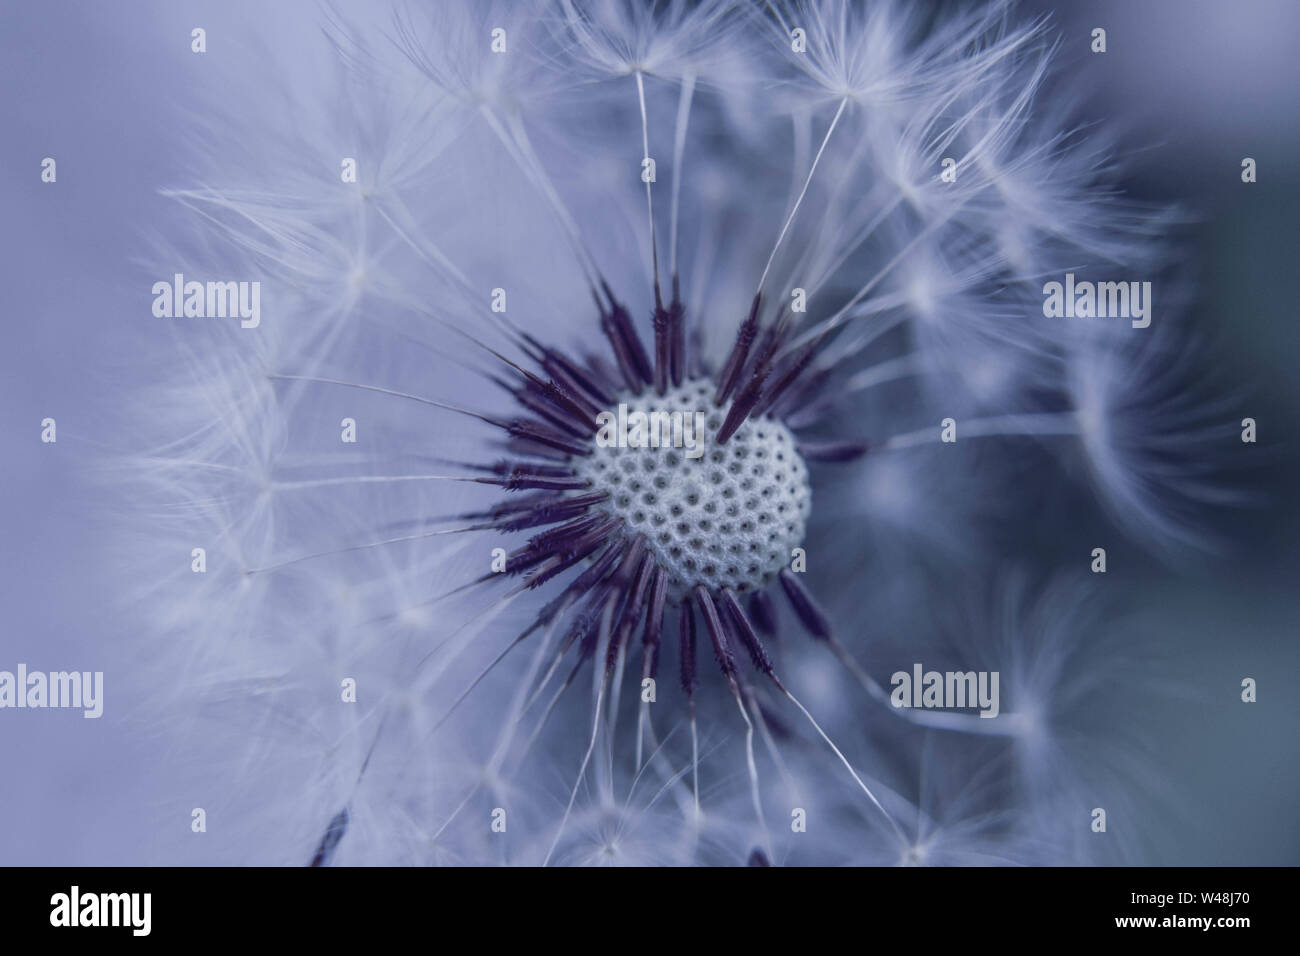 Closeup of dandelion seed/ conceptual image of luck and good wishes - Image Stock Photo